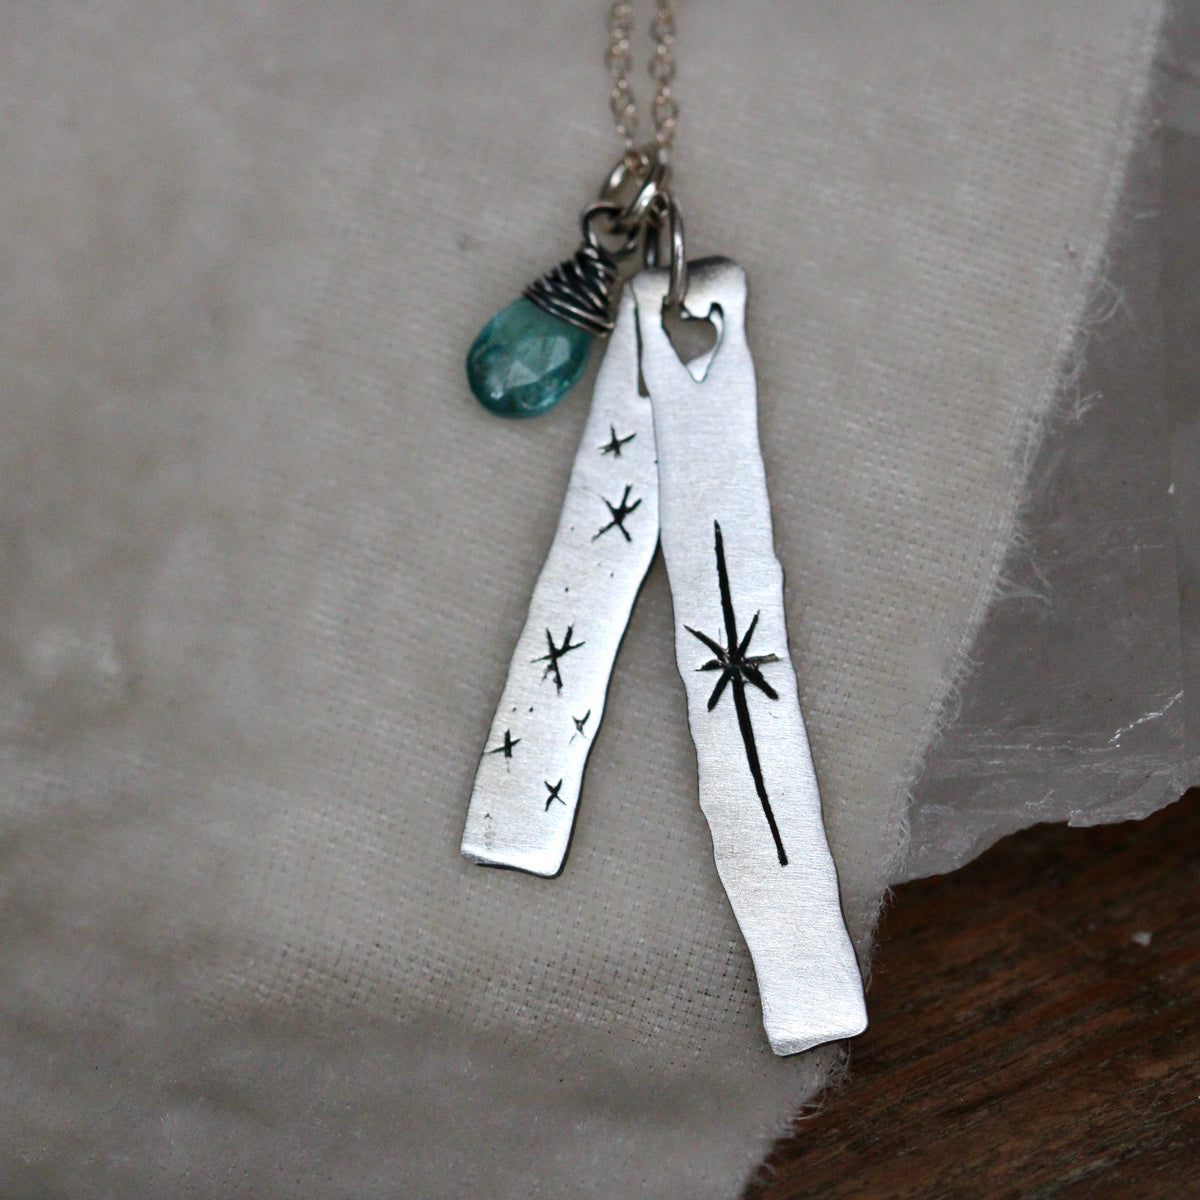 Darling You are Magic sterling silver and apatite necklace